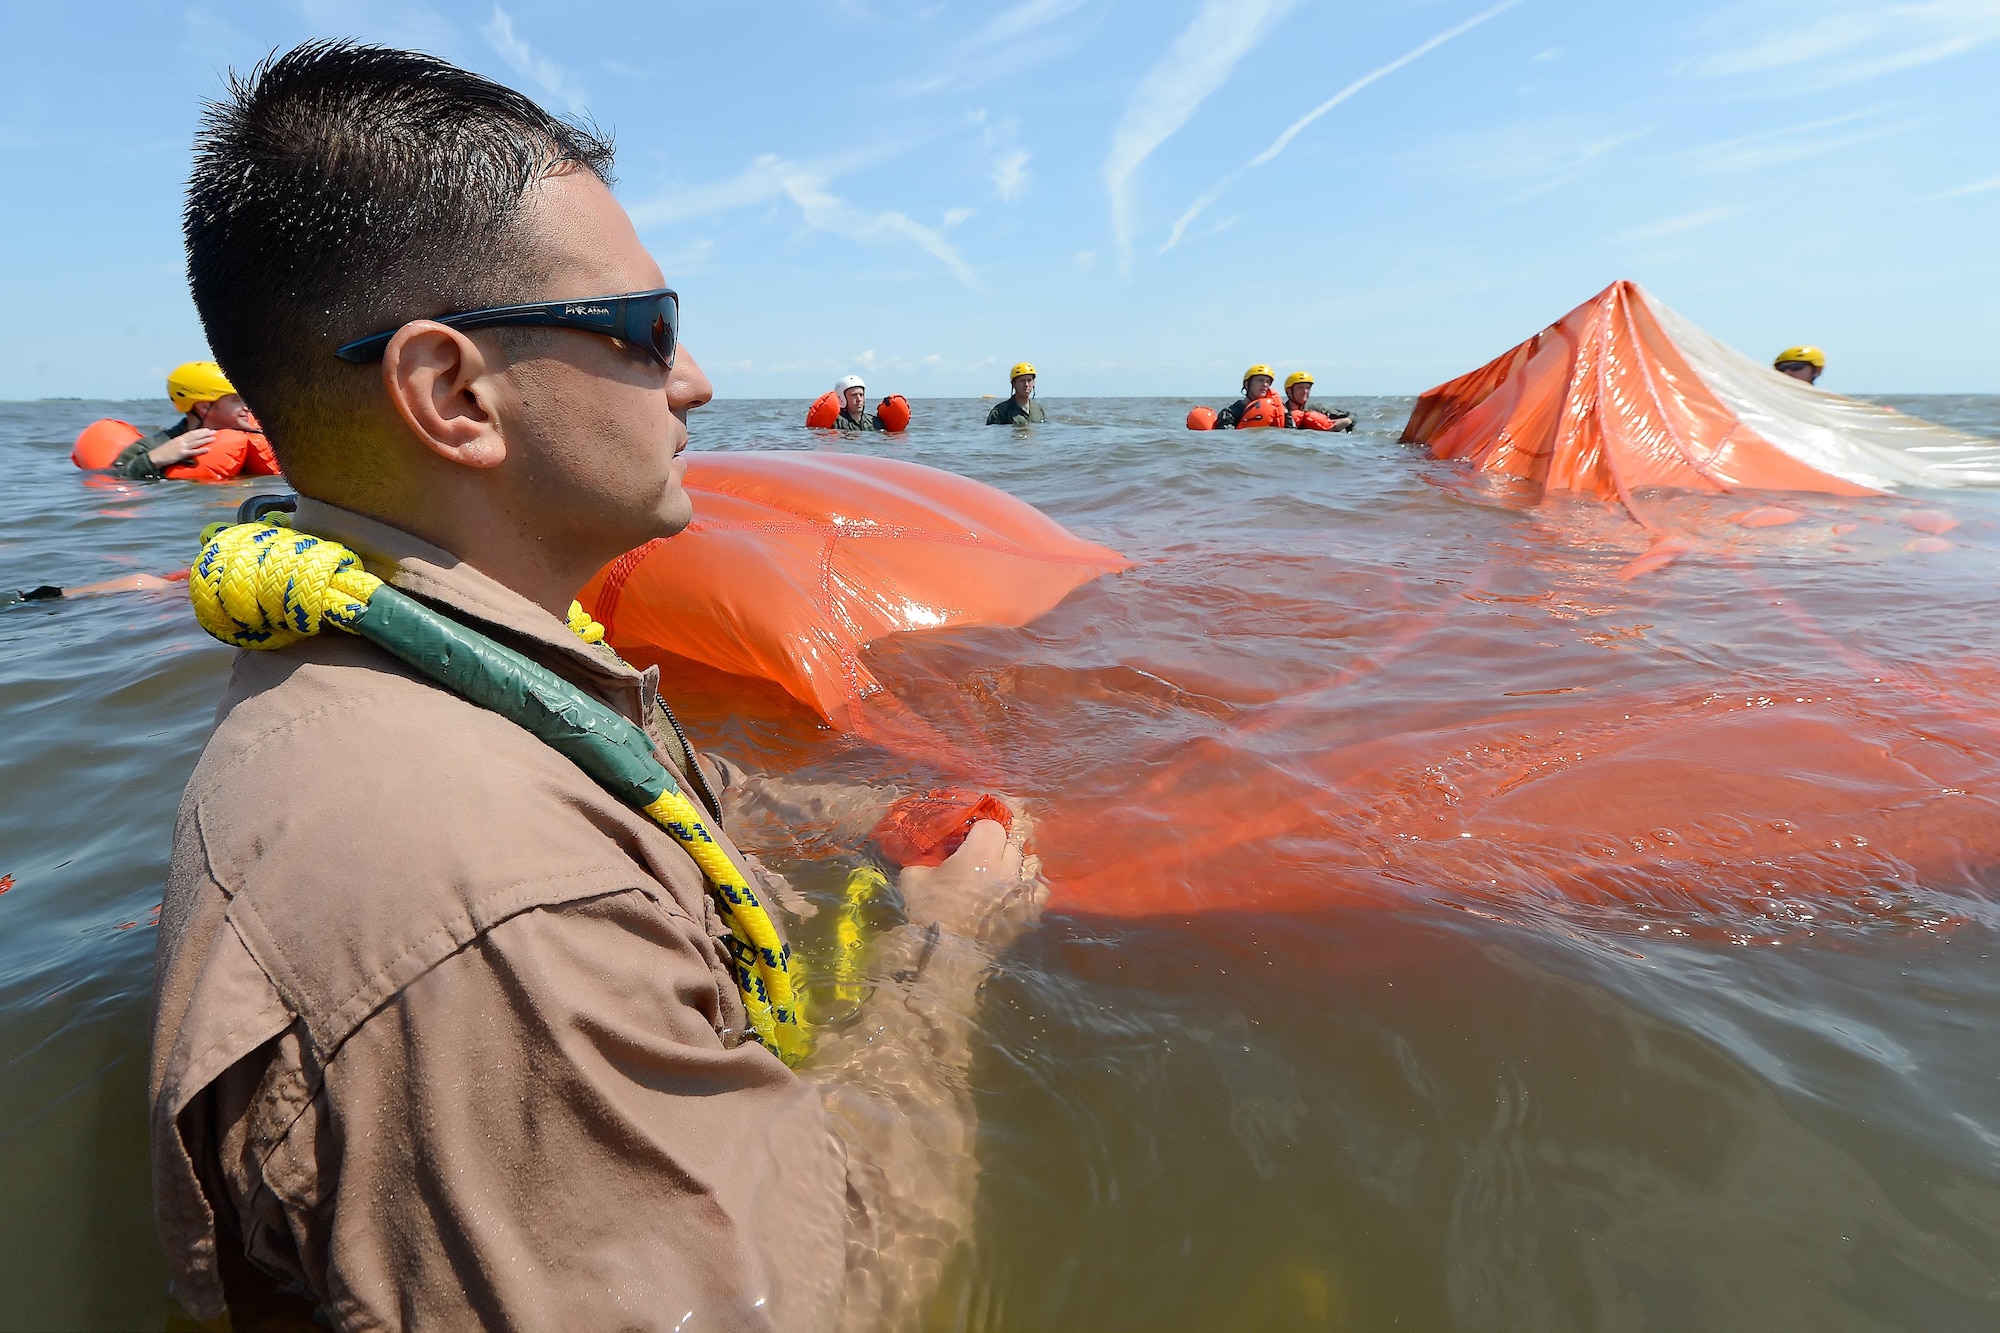 Tech. Sgt. Joseph Monreal, the 436th Operations Support Squadron Survival, Evasion, Resistance and Escape Operations flight chief, watches as a trainee uses a seam in a C-9 round parachute canopy to move from one edge to the other during aircrew water survival refresher training in the Delaware Bay July 17, 2015, near Dover Air Force Base, Del. Aircrew members of the 436th Airlift Wing and 512th Airlift Wing operate the C-5M Super Galaxy and C-17A Globemaster III, and had members who participated in the required refresher training. (U.S. Air Force photo/Greg L. Davis)